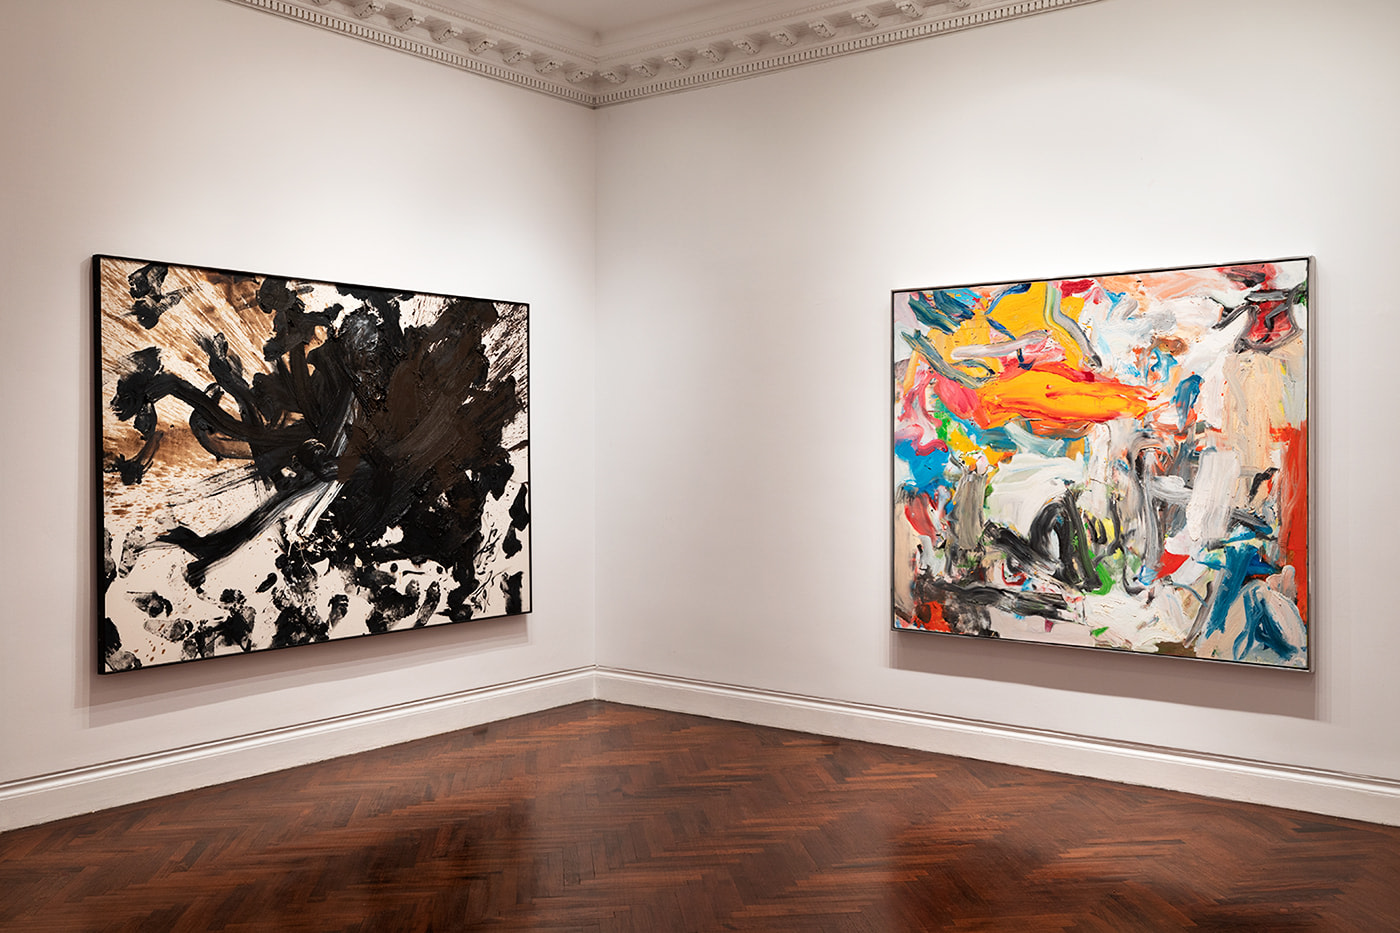 Installation&amp;nbsp;view of&amp;nbsp;De Kooning/Shiraga&amp;nbsp;at Mnuchin Gallery, New York, in collaboration with Fergus McCaffrey, February 15-April 16, 2022. &amp;copy; 2022 The Willem de Kooning Foundation / Artists Rights Society (ARS), New York; Estate of Kazuo Shiraga. Photo by&amp;nbsp;Nico&amp;nbsp;Gilmore.